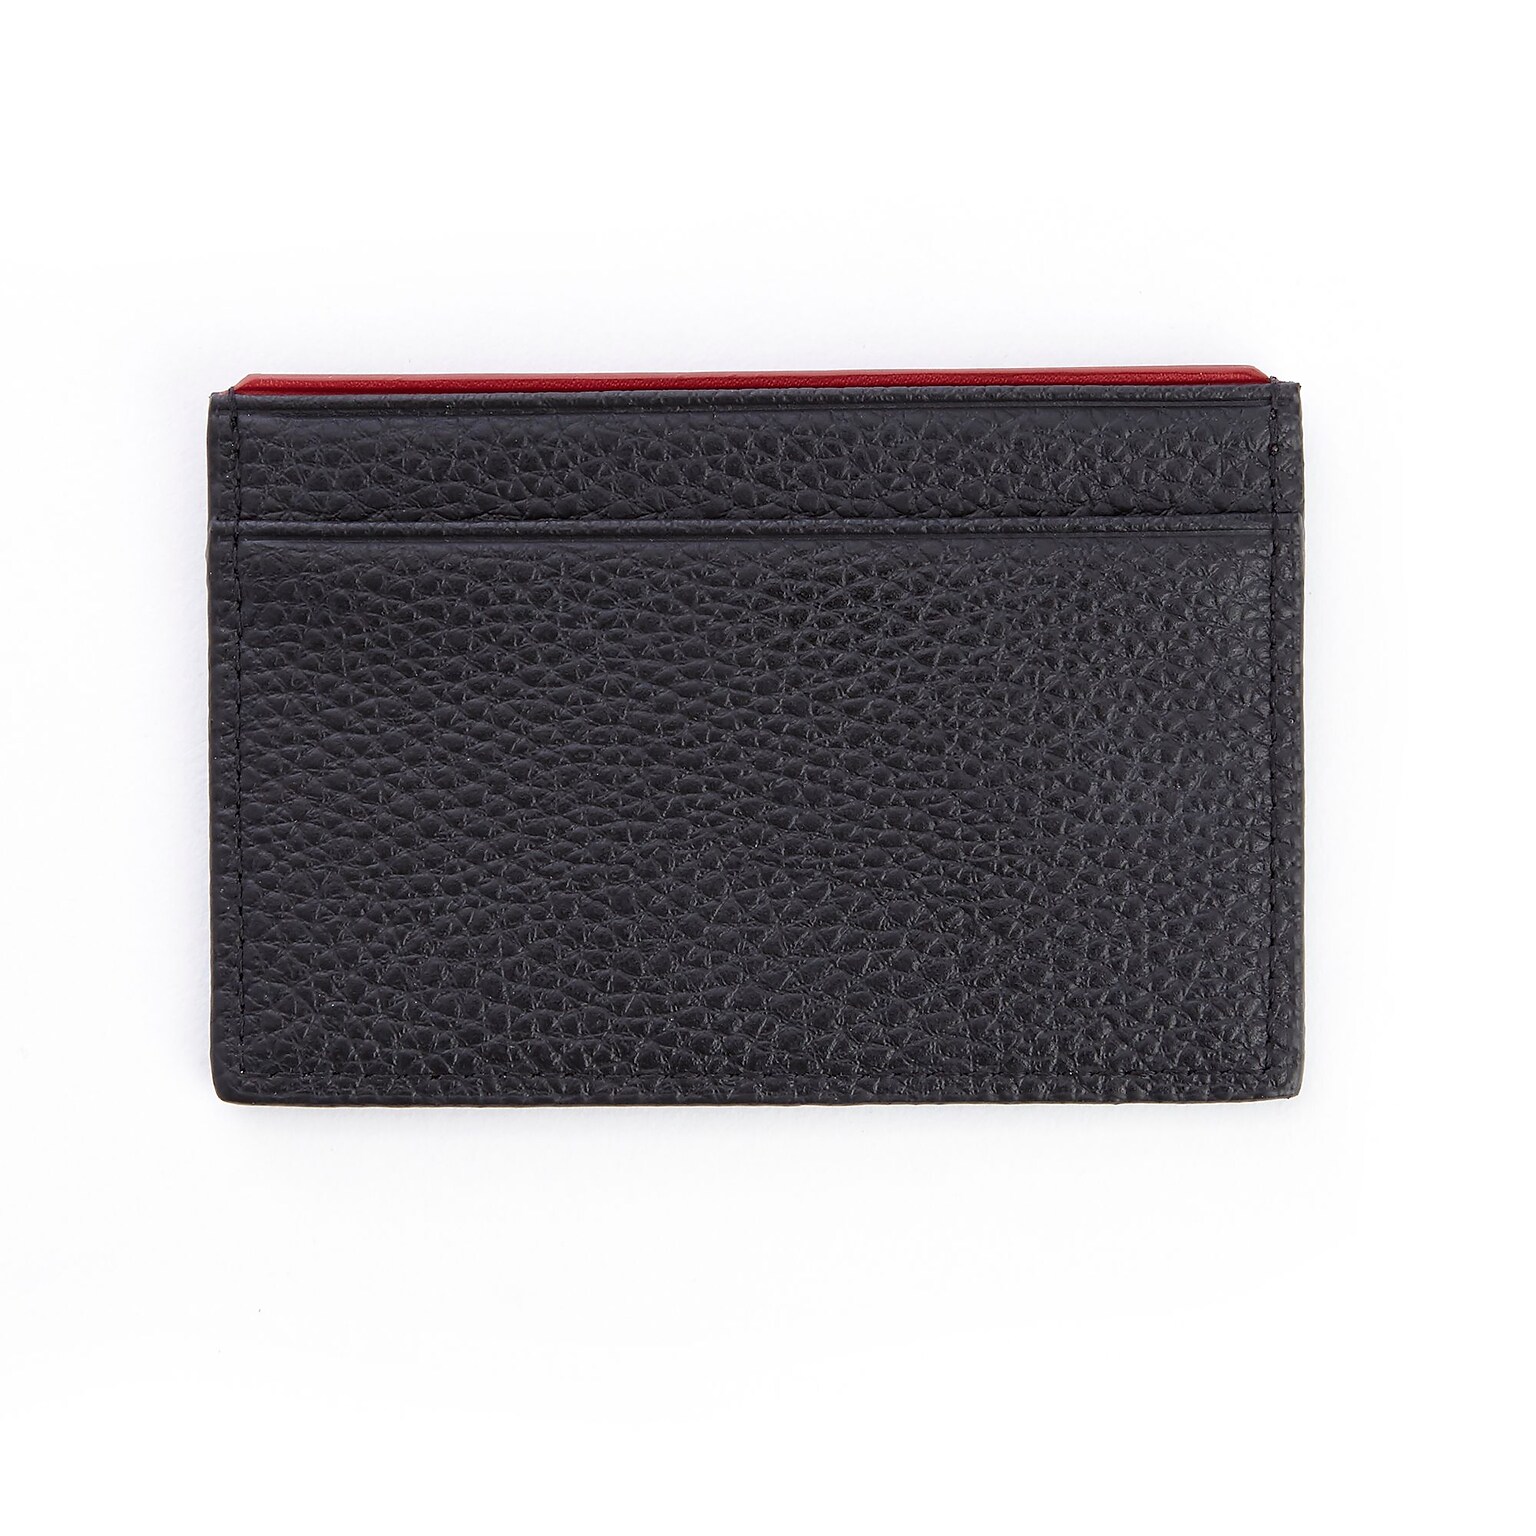 Royce Leather Luxury Credit Card Wallet with RFID Blocking Technology for Identity Protection(RFID-400-BLRD-0)